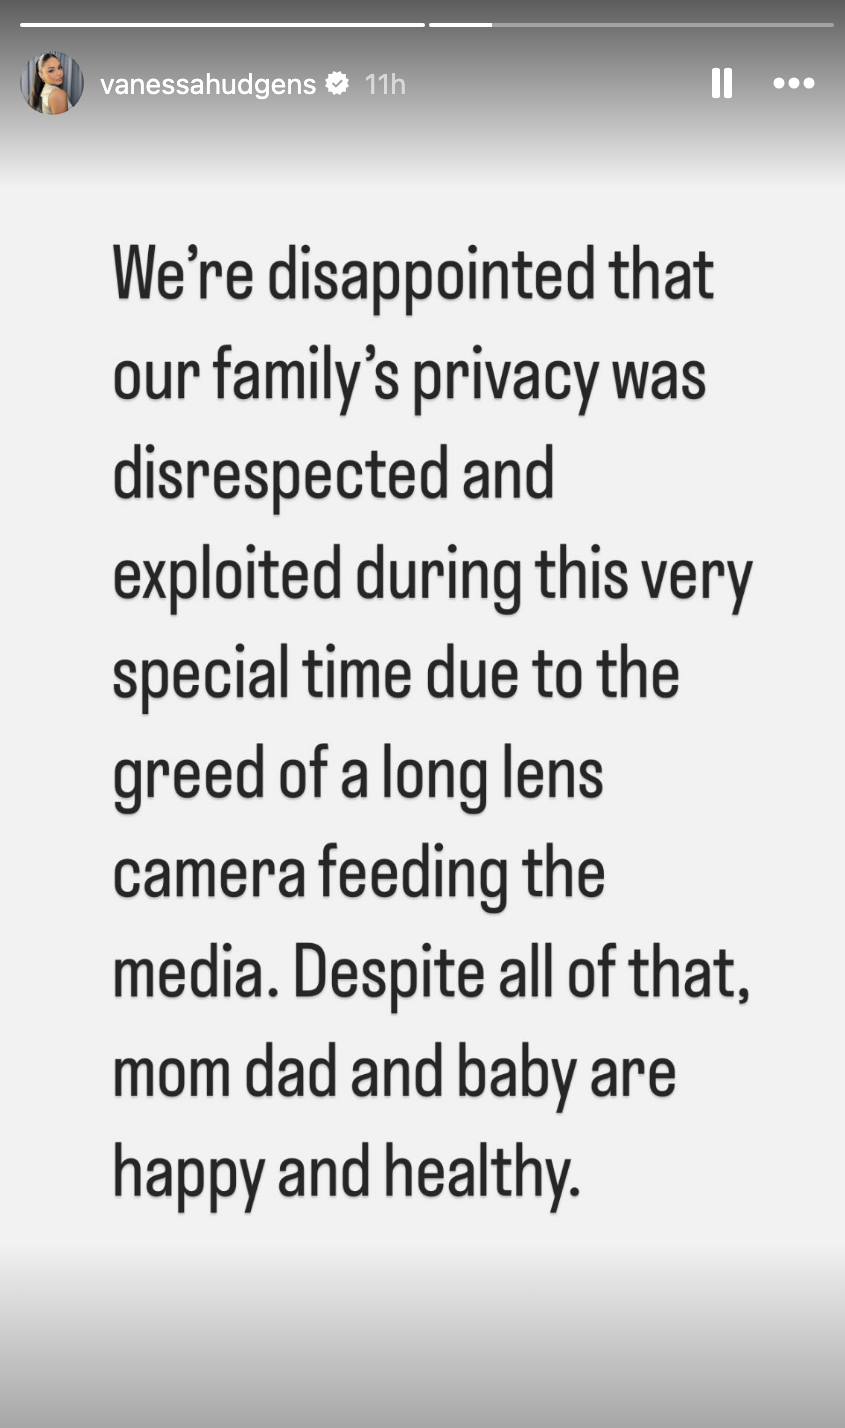 Summary of Vanessa Hudgens&#x27; Instagram story text: The family&#x27;s privacy was violated by media, but despite this, mom, dad, and baby are happy and healthy